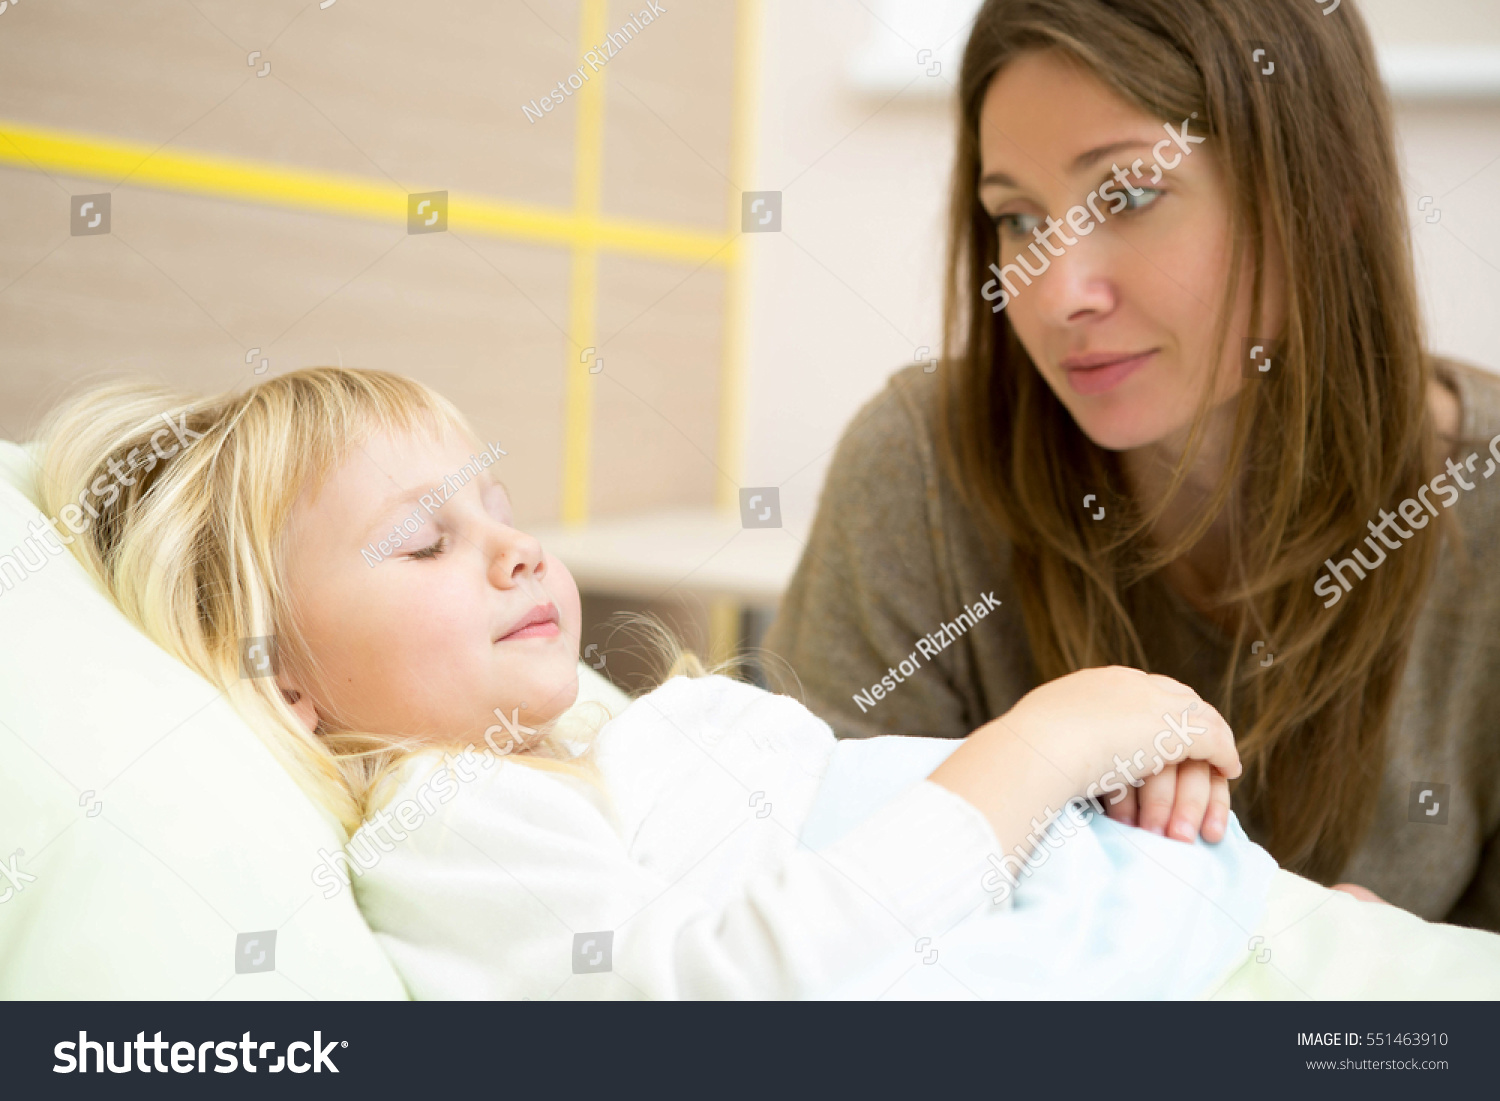 Sleeping well. Beautiful mature woman sitting near her daughterÃ¢??s bed in the hospital ward looking at her sleeping child with love copyspace motherhood children health sleeping illness concept #551463910